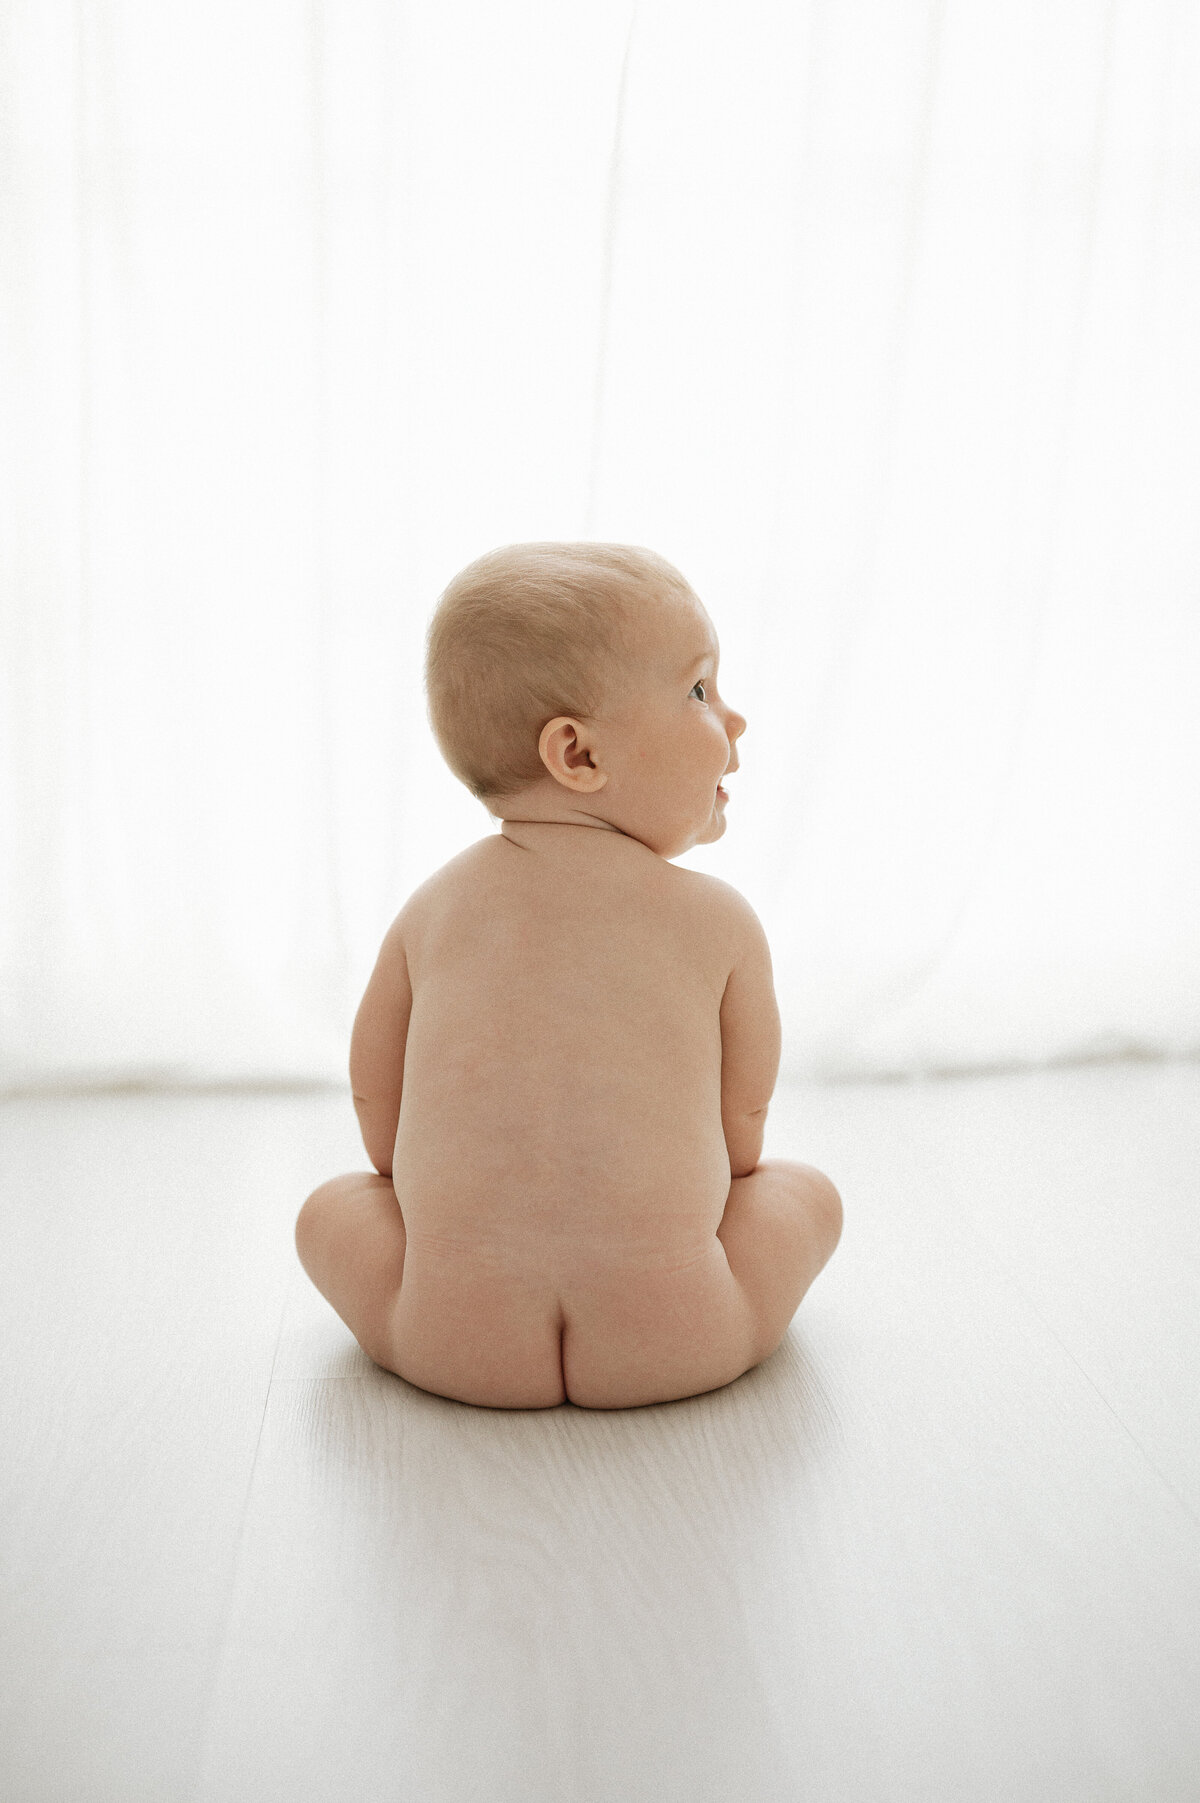 Naked baby sits looking out the window